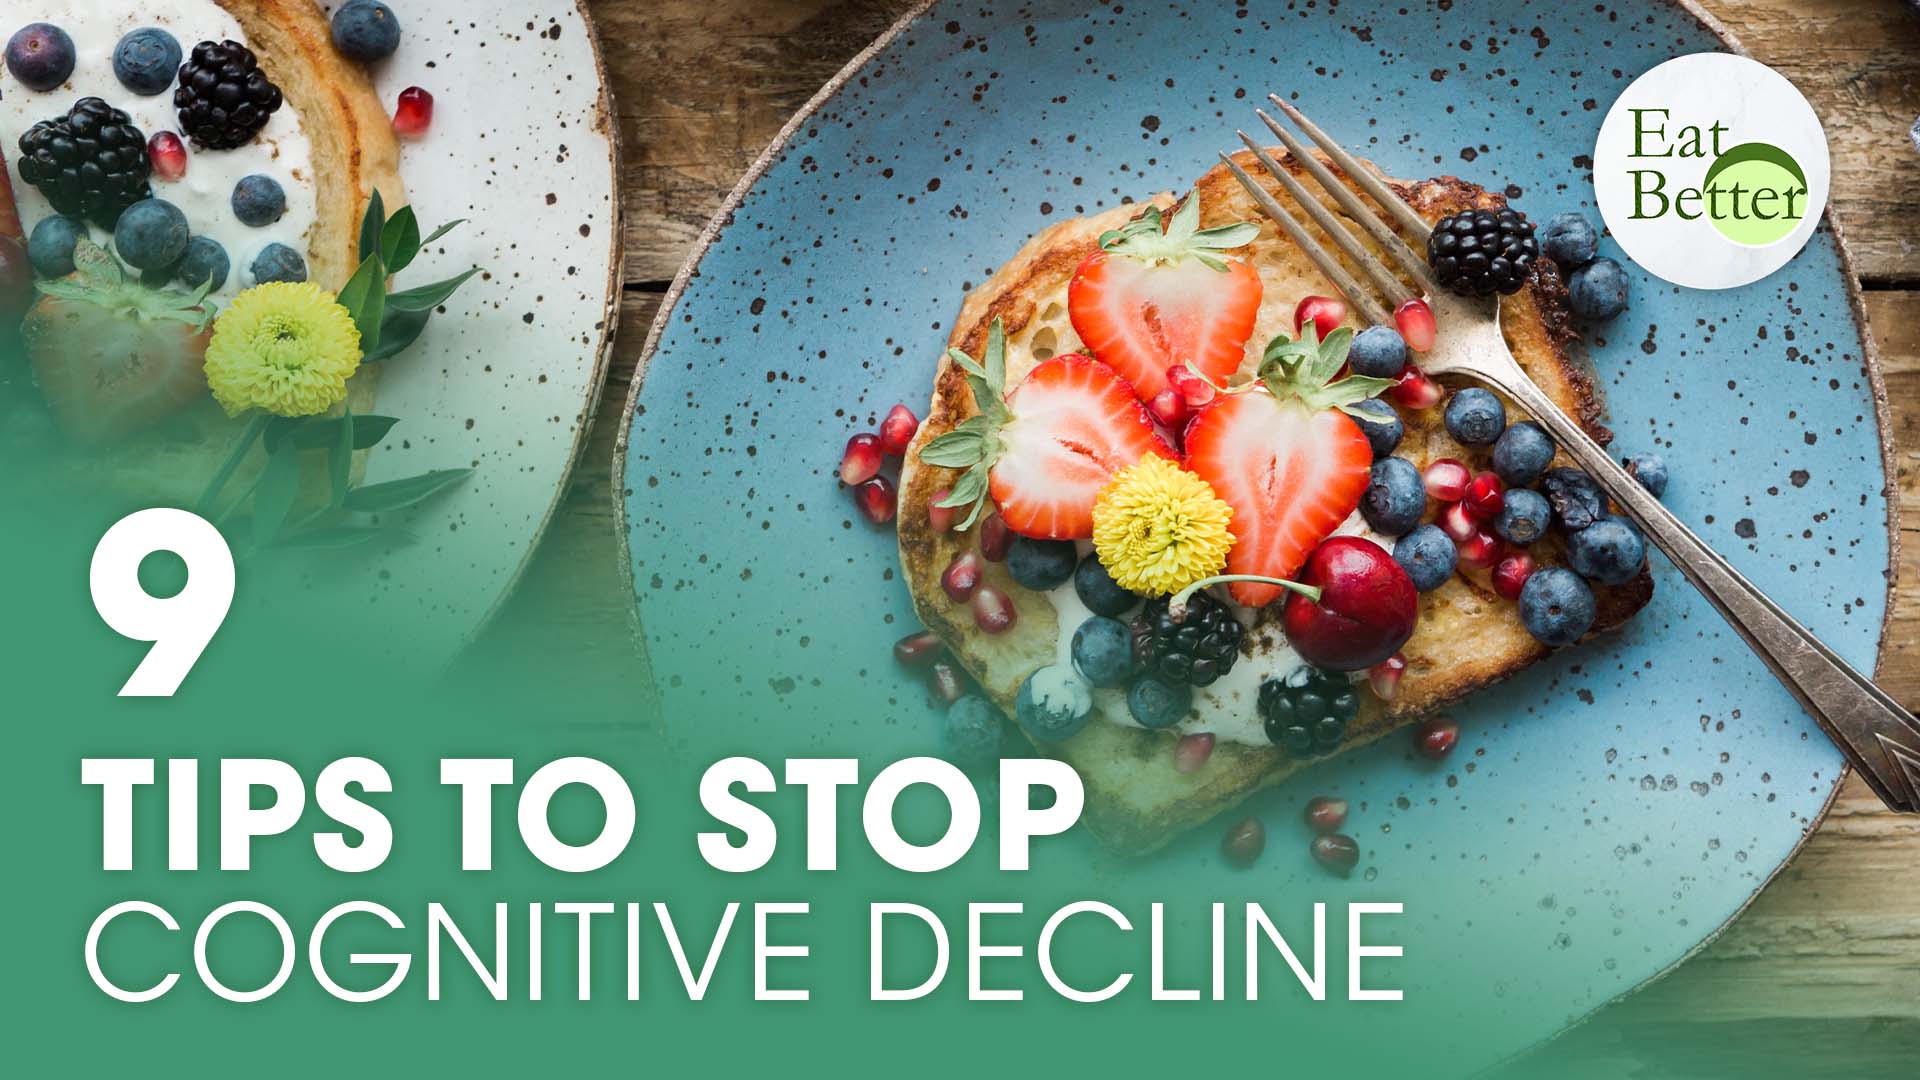 Stop Cognitive Decline With These 9 Great Nutritional Tips | Eat Better